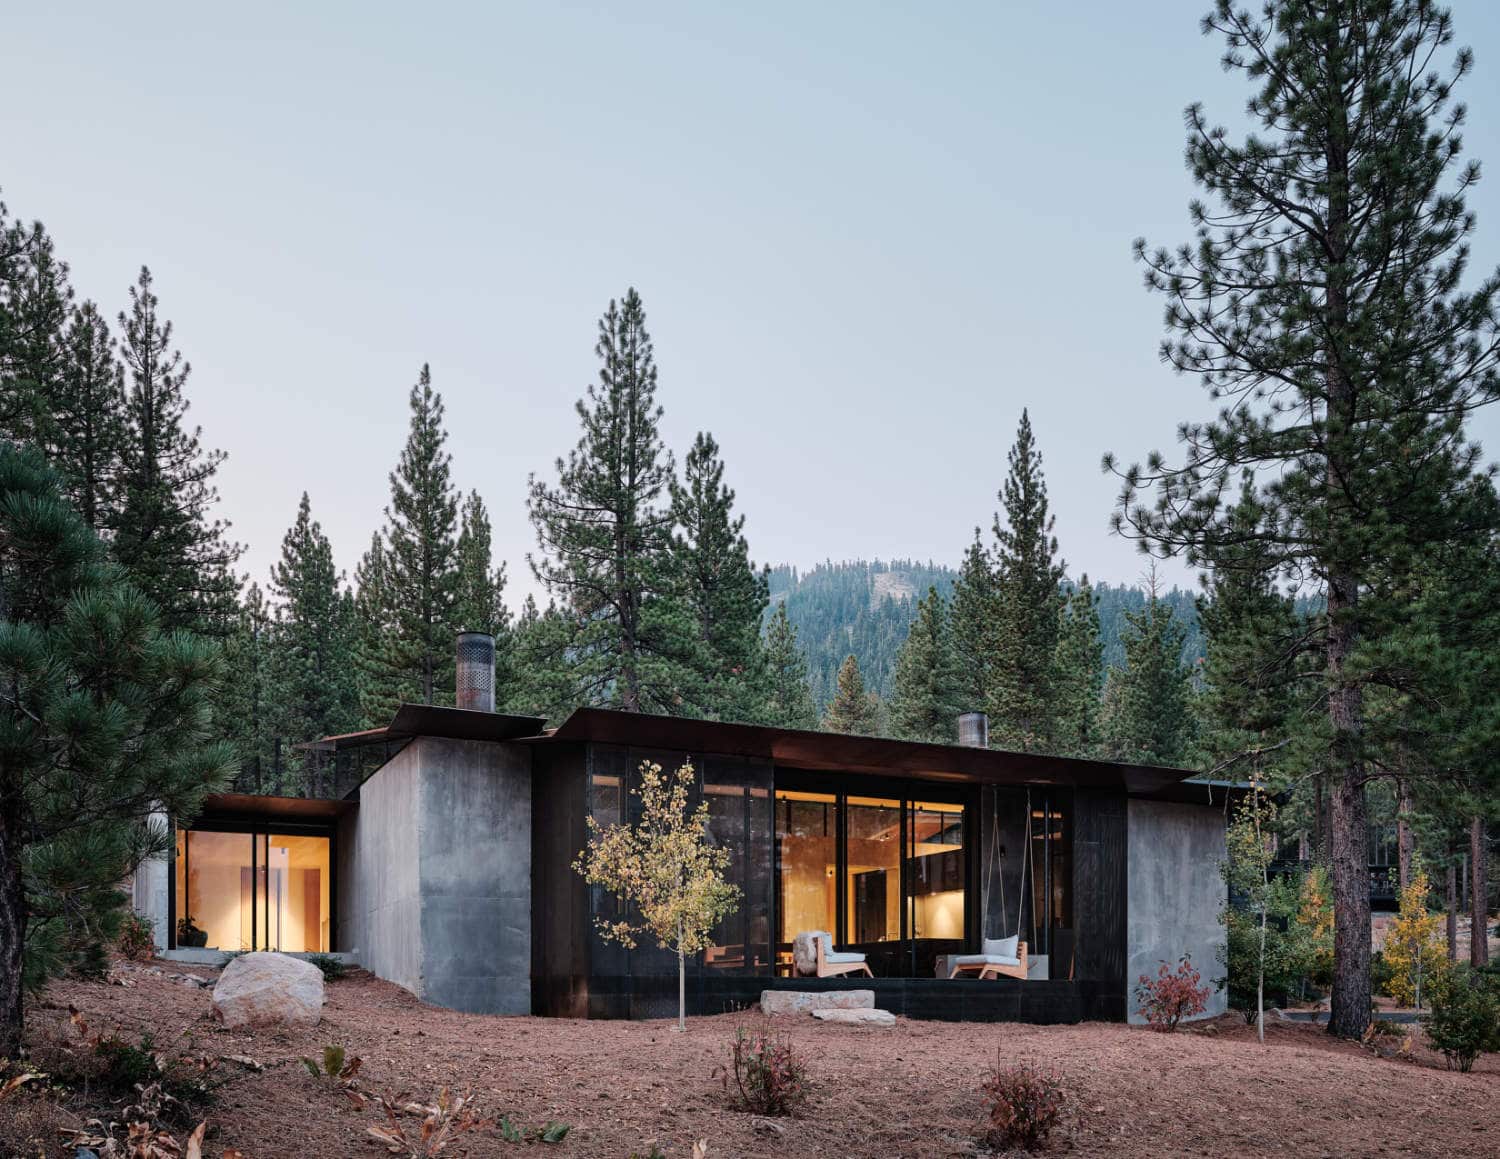 CAMPout by Faulkner Architects